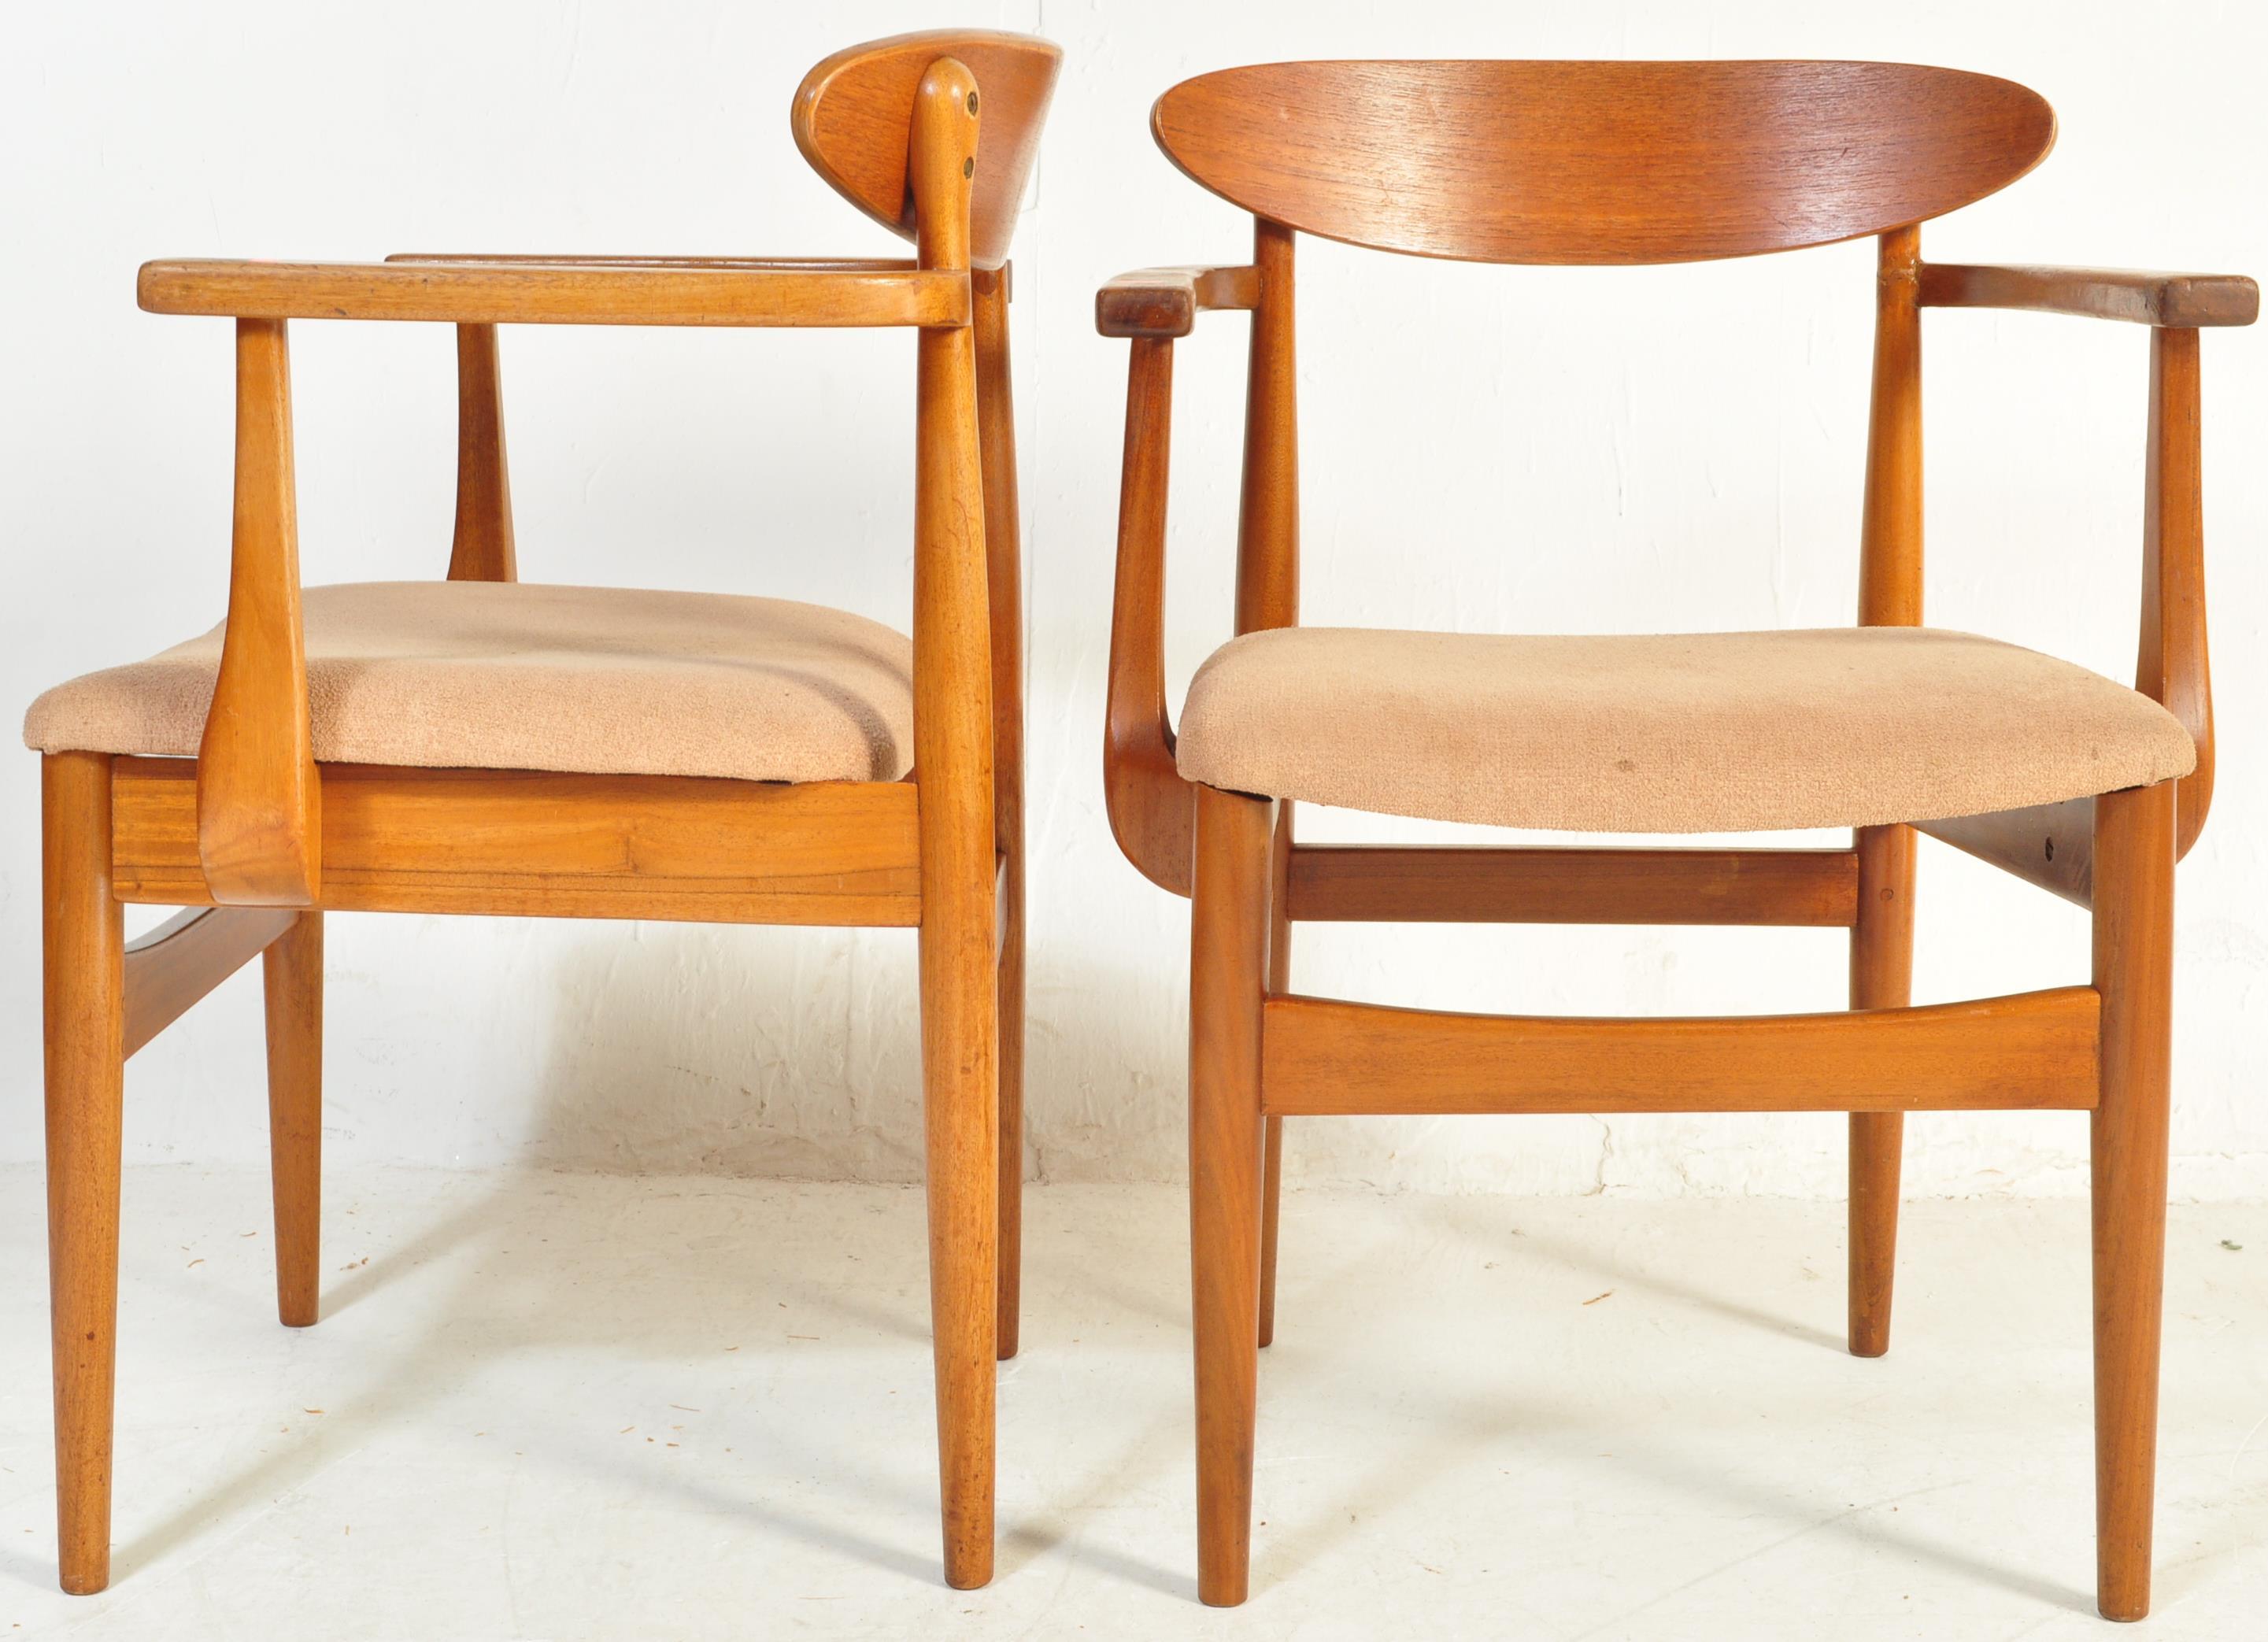 PAIR OF MID 20TH CENTURY DANISH TEAK DINING CHAIRS CARVERS - Image 4 of 5